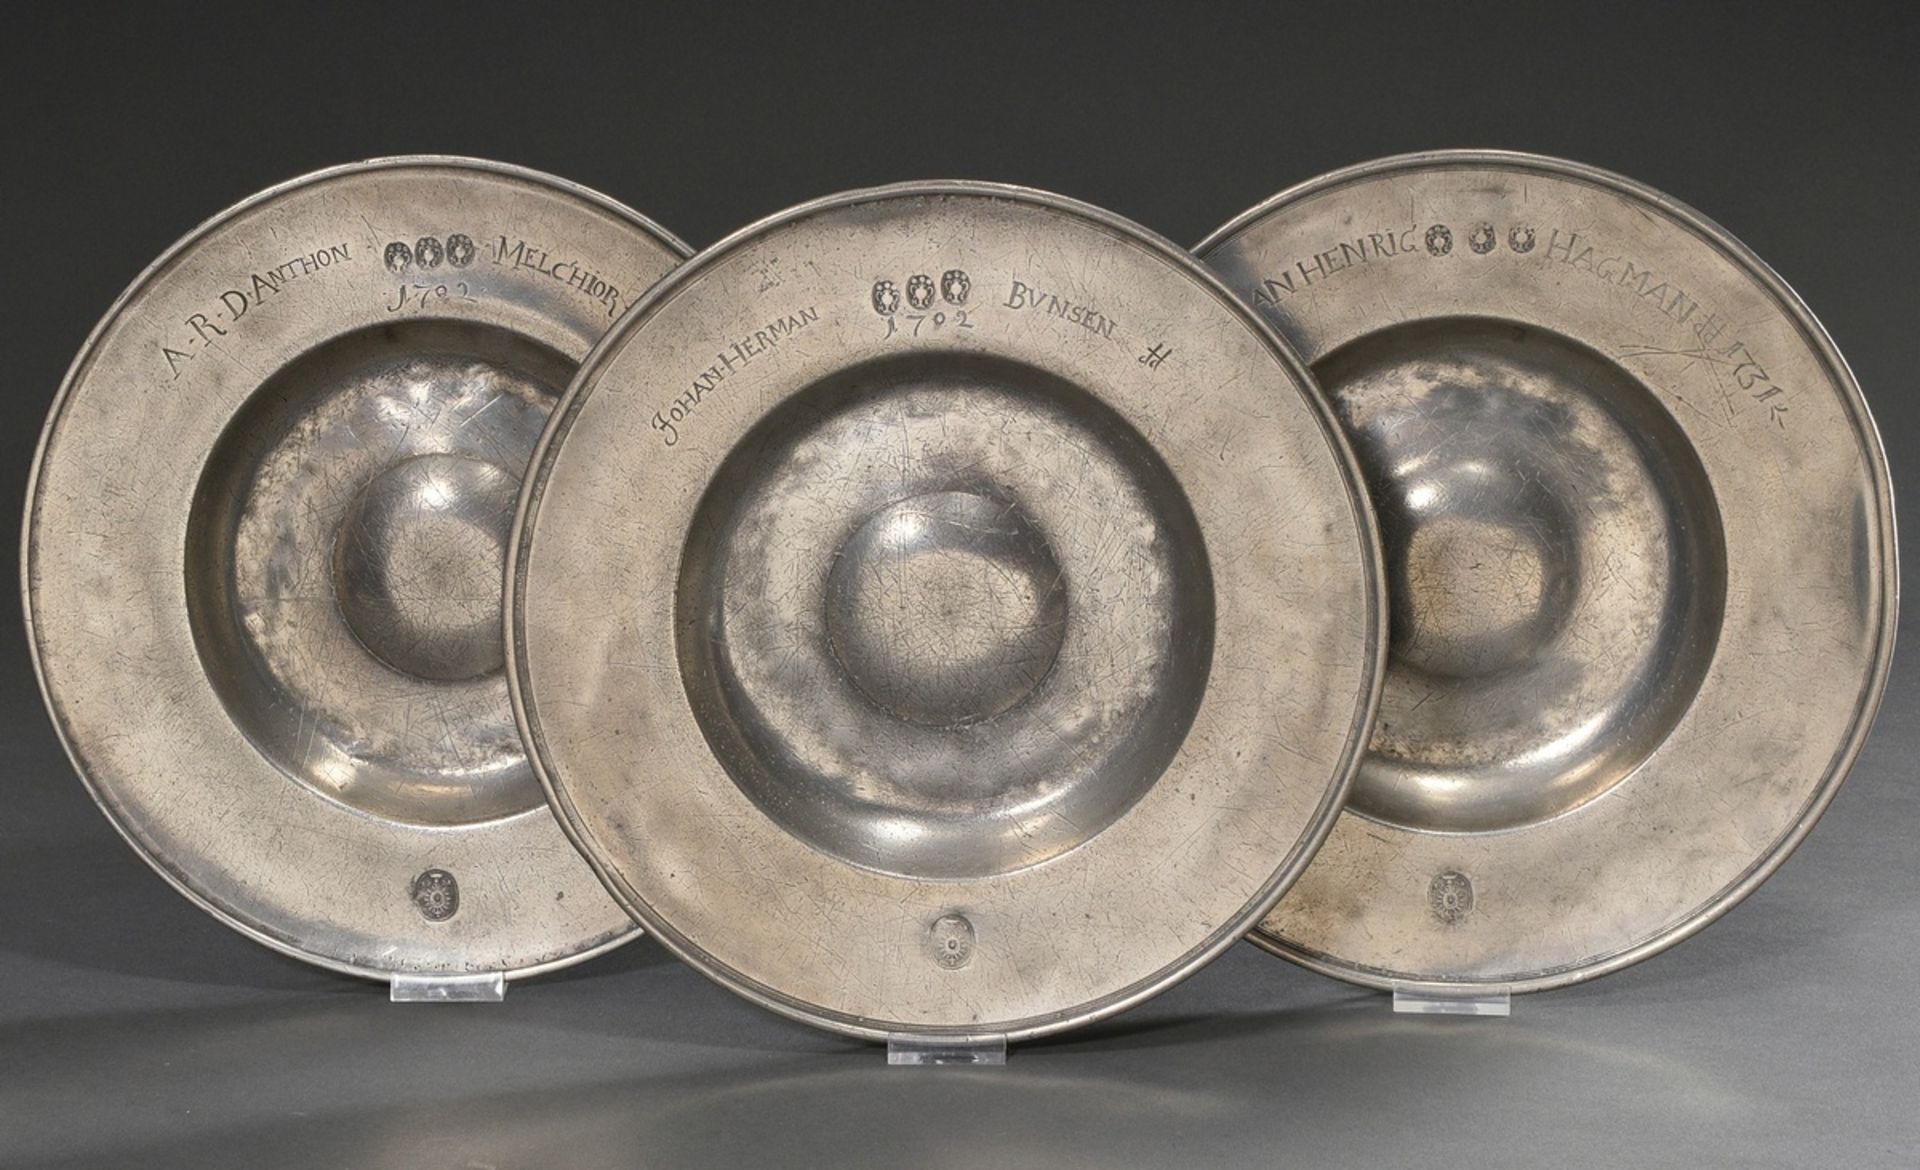 3 pewter wide rim plates with a humped centre, each dated and marked on the rim "A.R.D. Anthon Melc